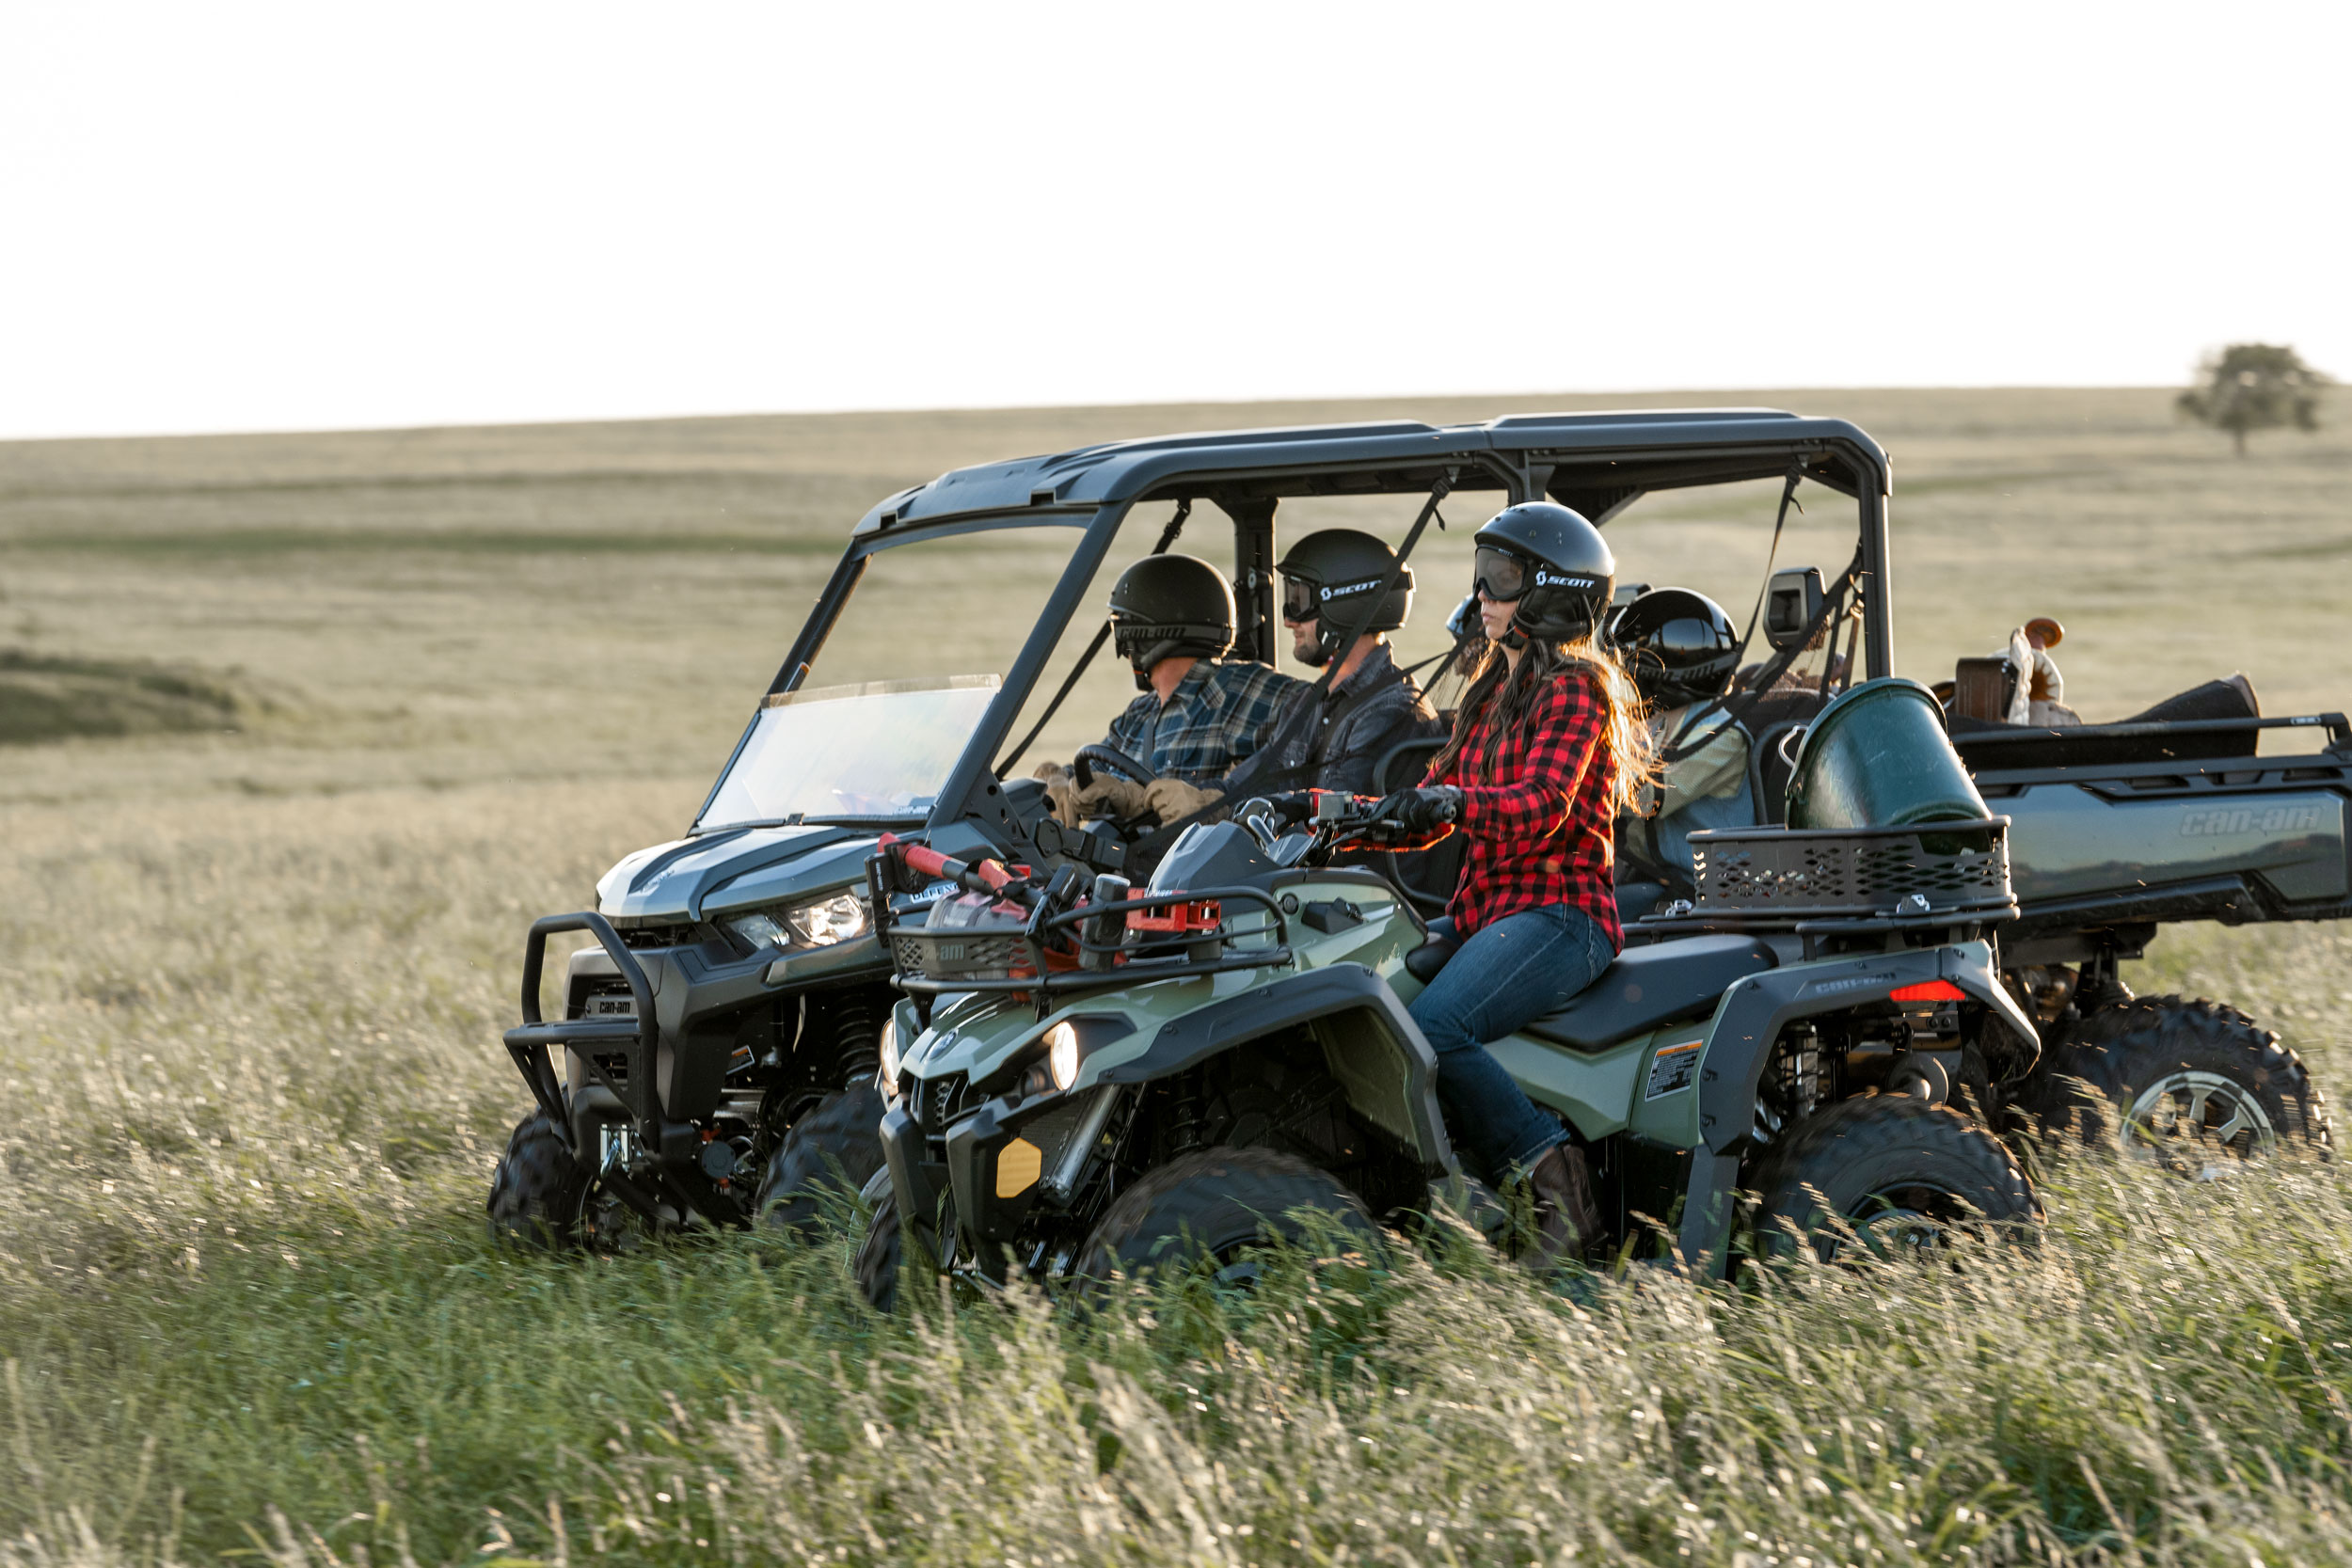 THE ATV & SIDE-BY-SIDE NEW OWNER’S GUIDE